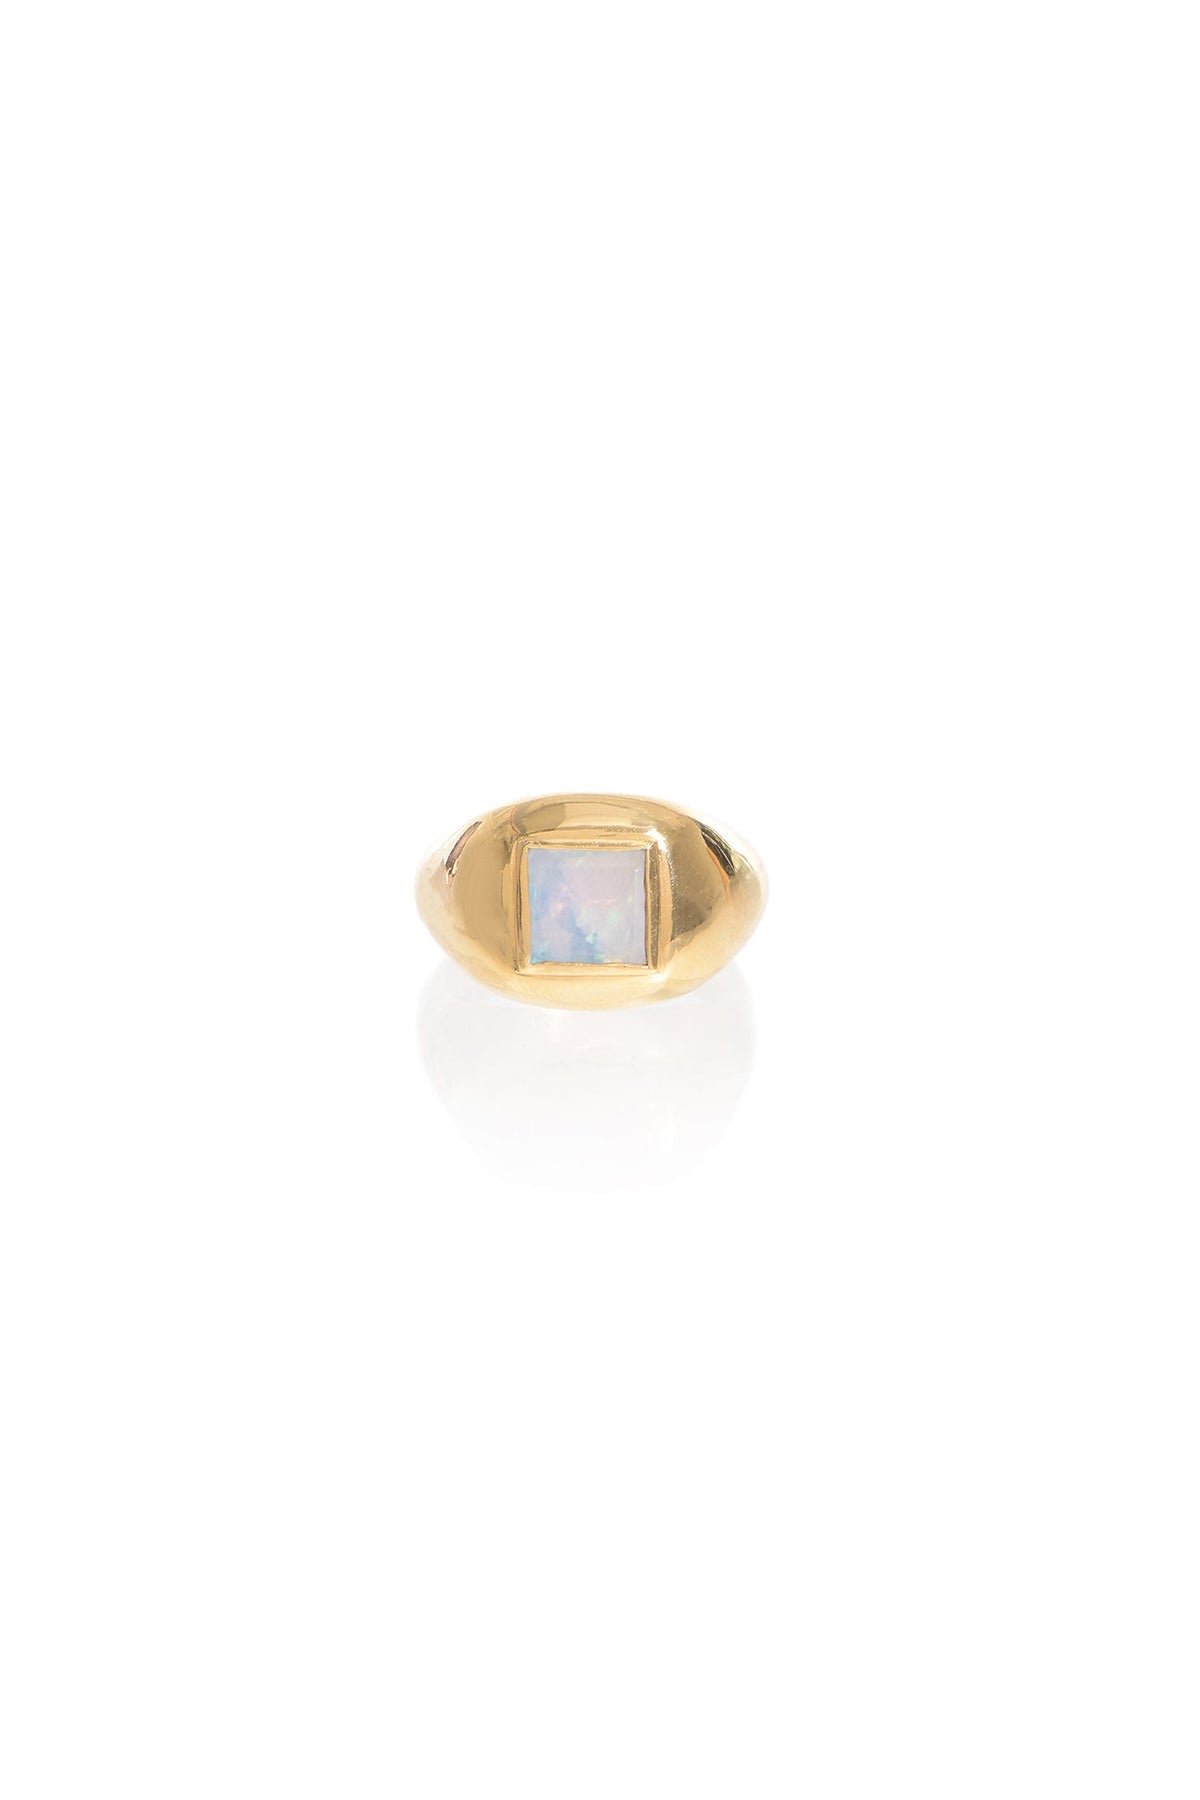 Medium Ring in 18k Gold & Mother of Pearl Stone